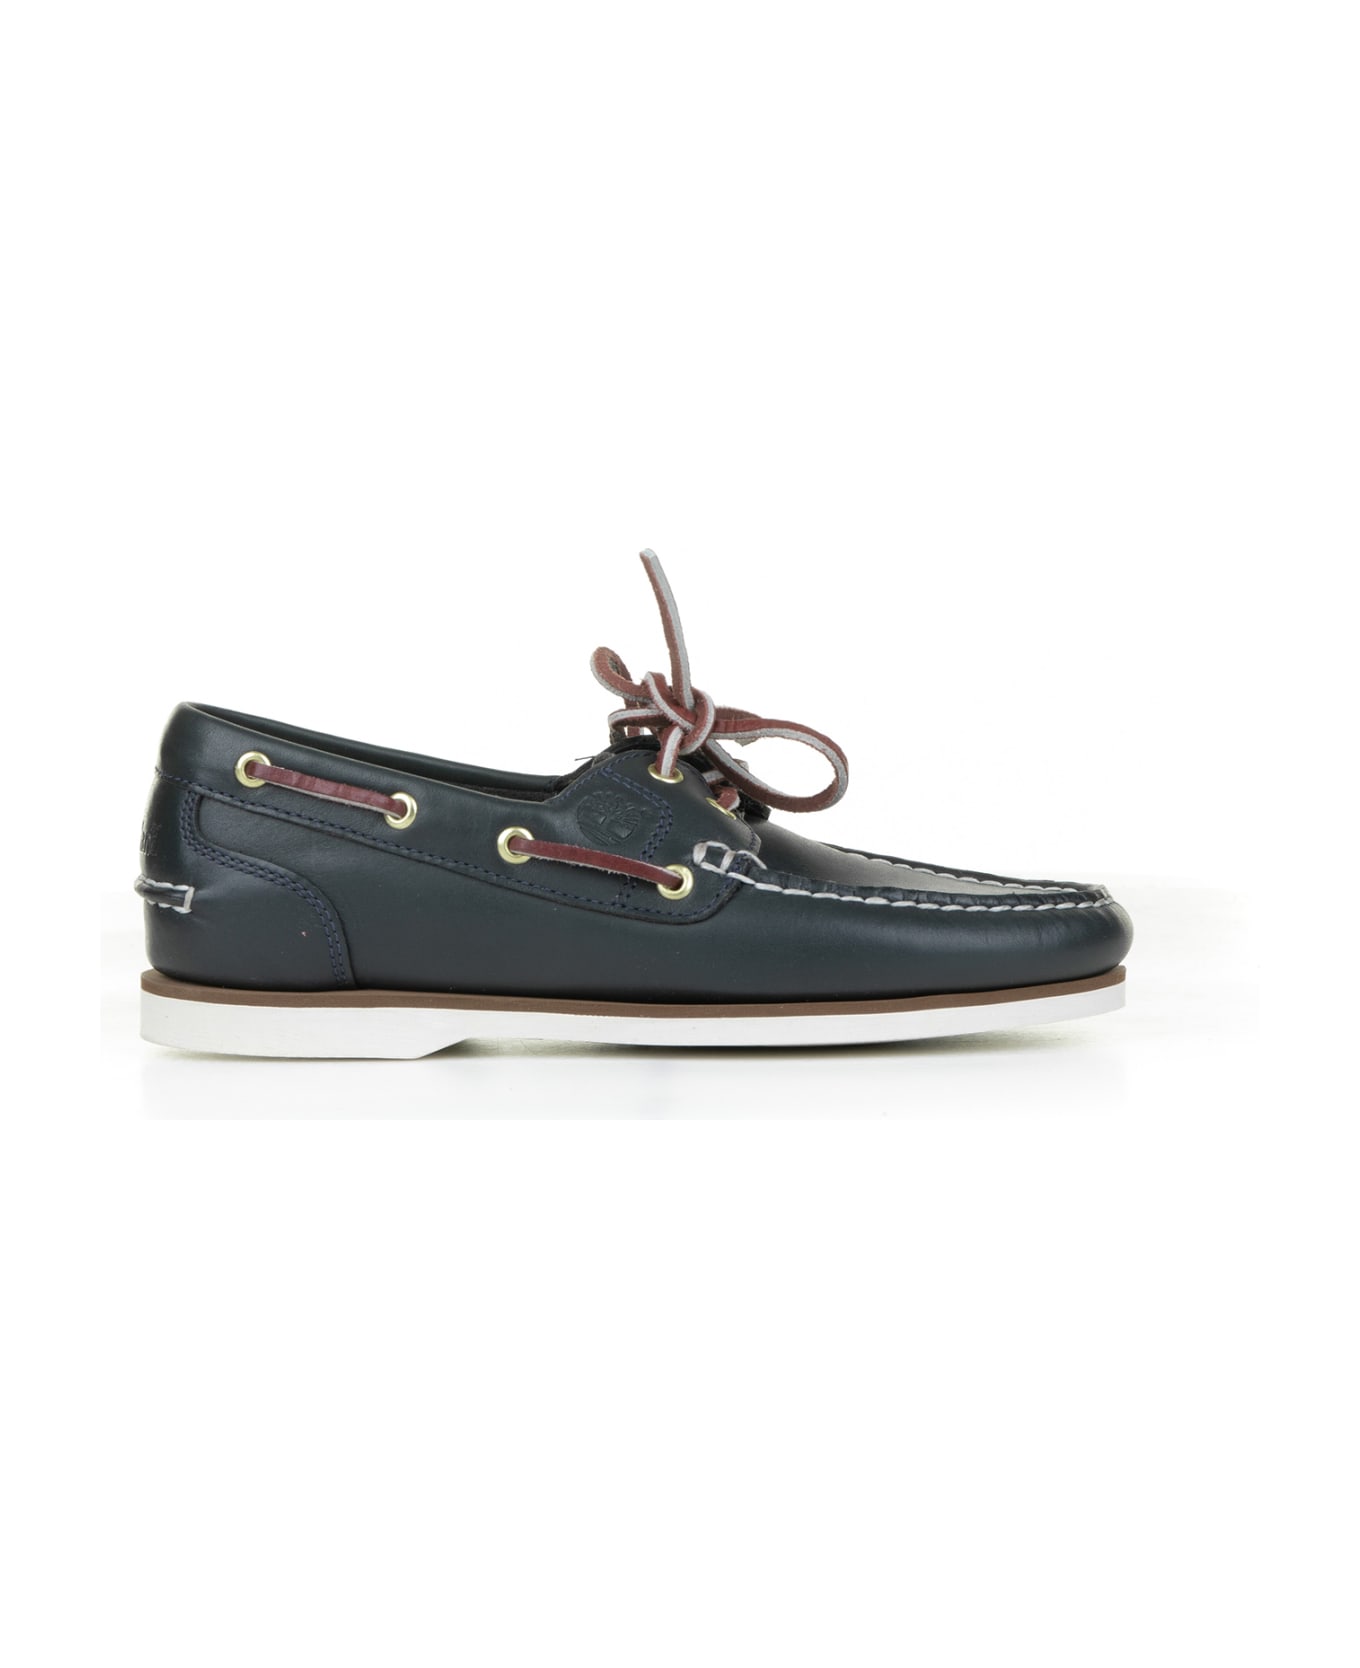 Timberland Blue Leather Boat Loafer - BLUE